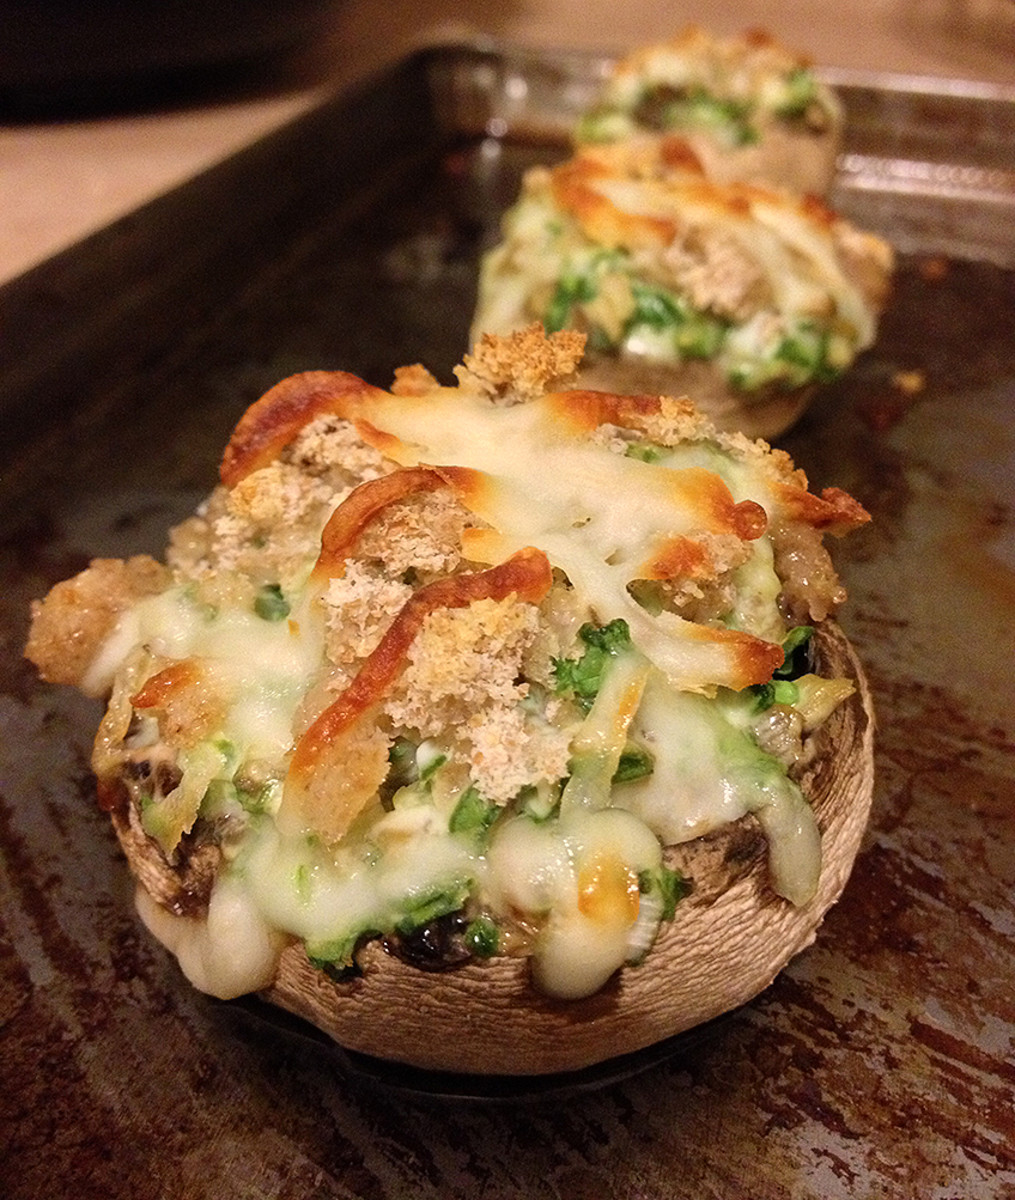 Spinach and cheese stuffed mushroom caps with Parmesan crumbs